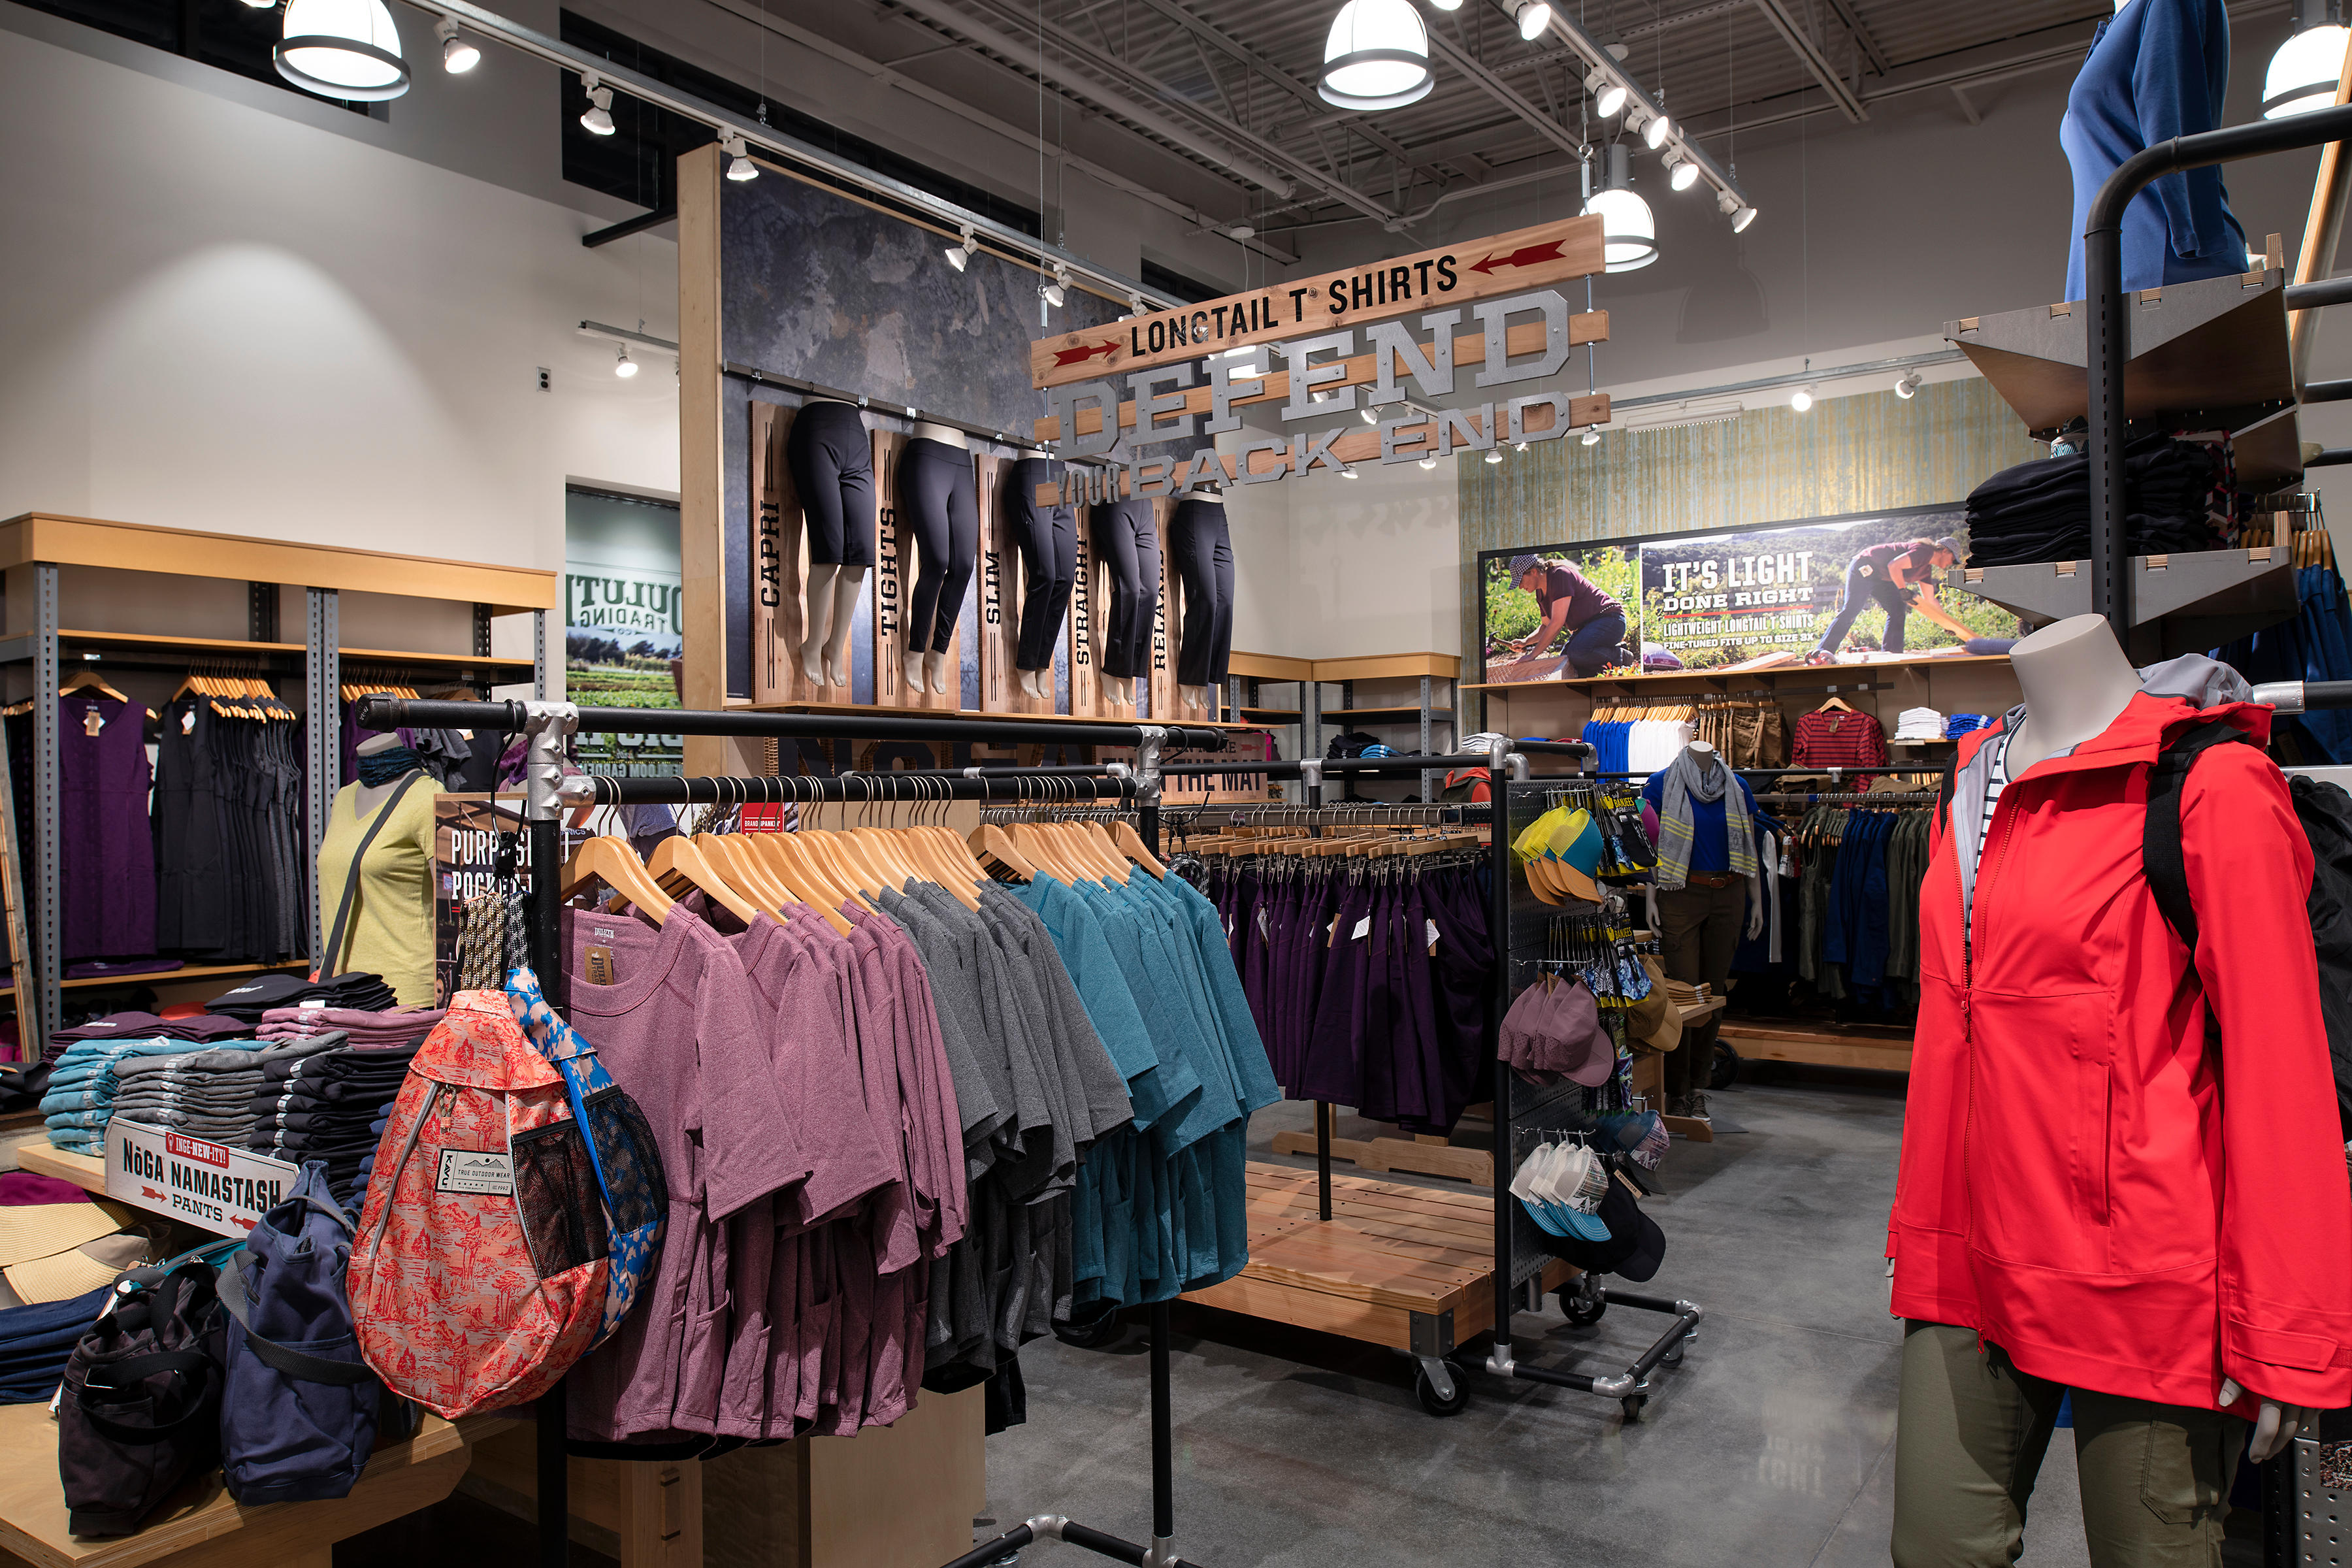 Duluth Trading Company Hats for Women